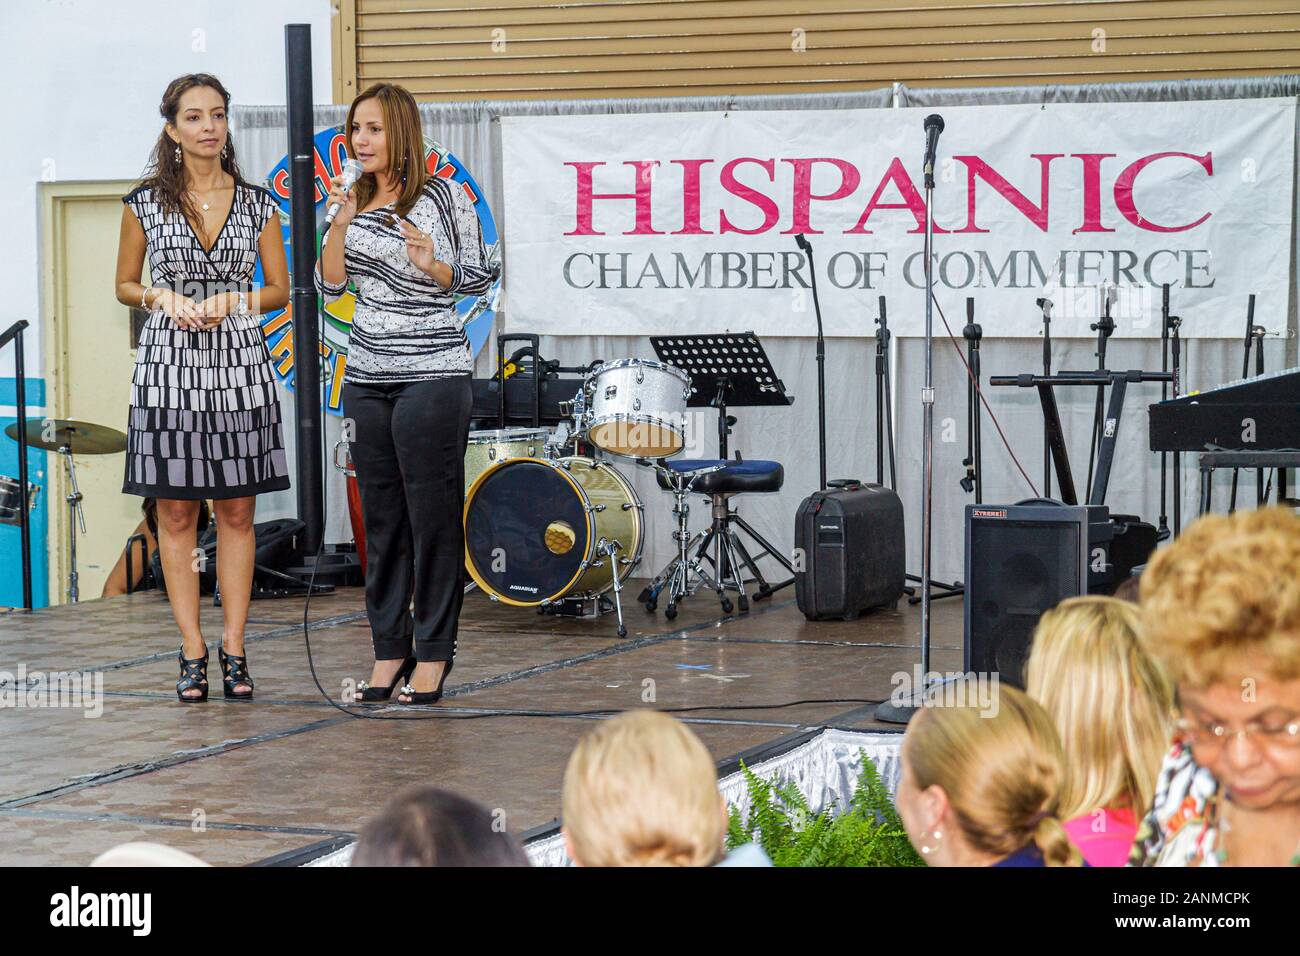 Miami Florida,Doubletree Miami Mart,hotel,Center,centre,Hispanic business,Expo Festival,Chamber of Commerce,woman female women,speaking,stage,micropho Stock Photo